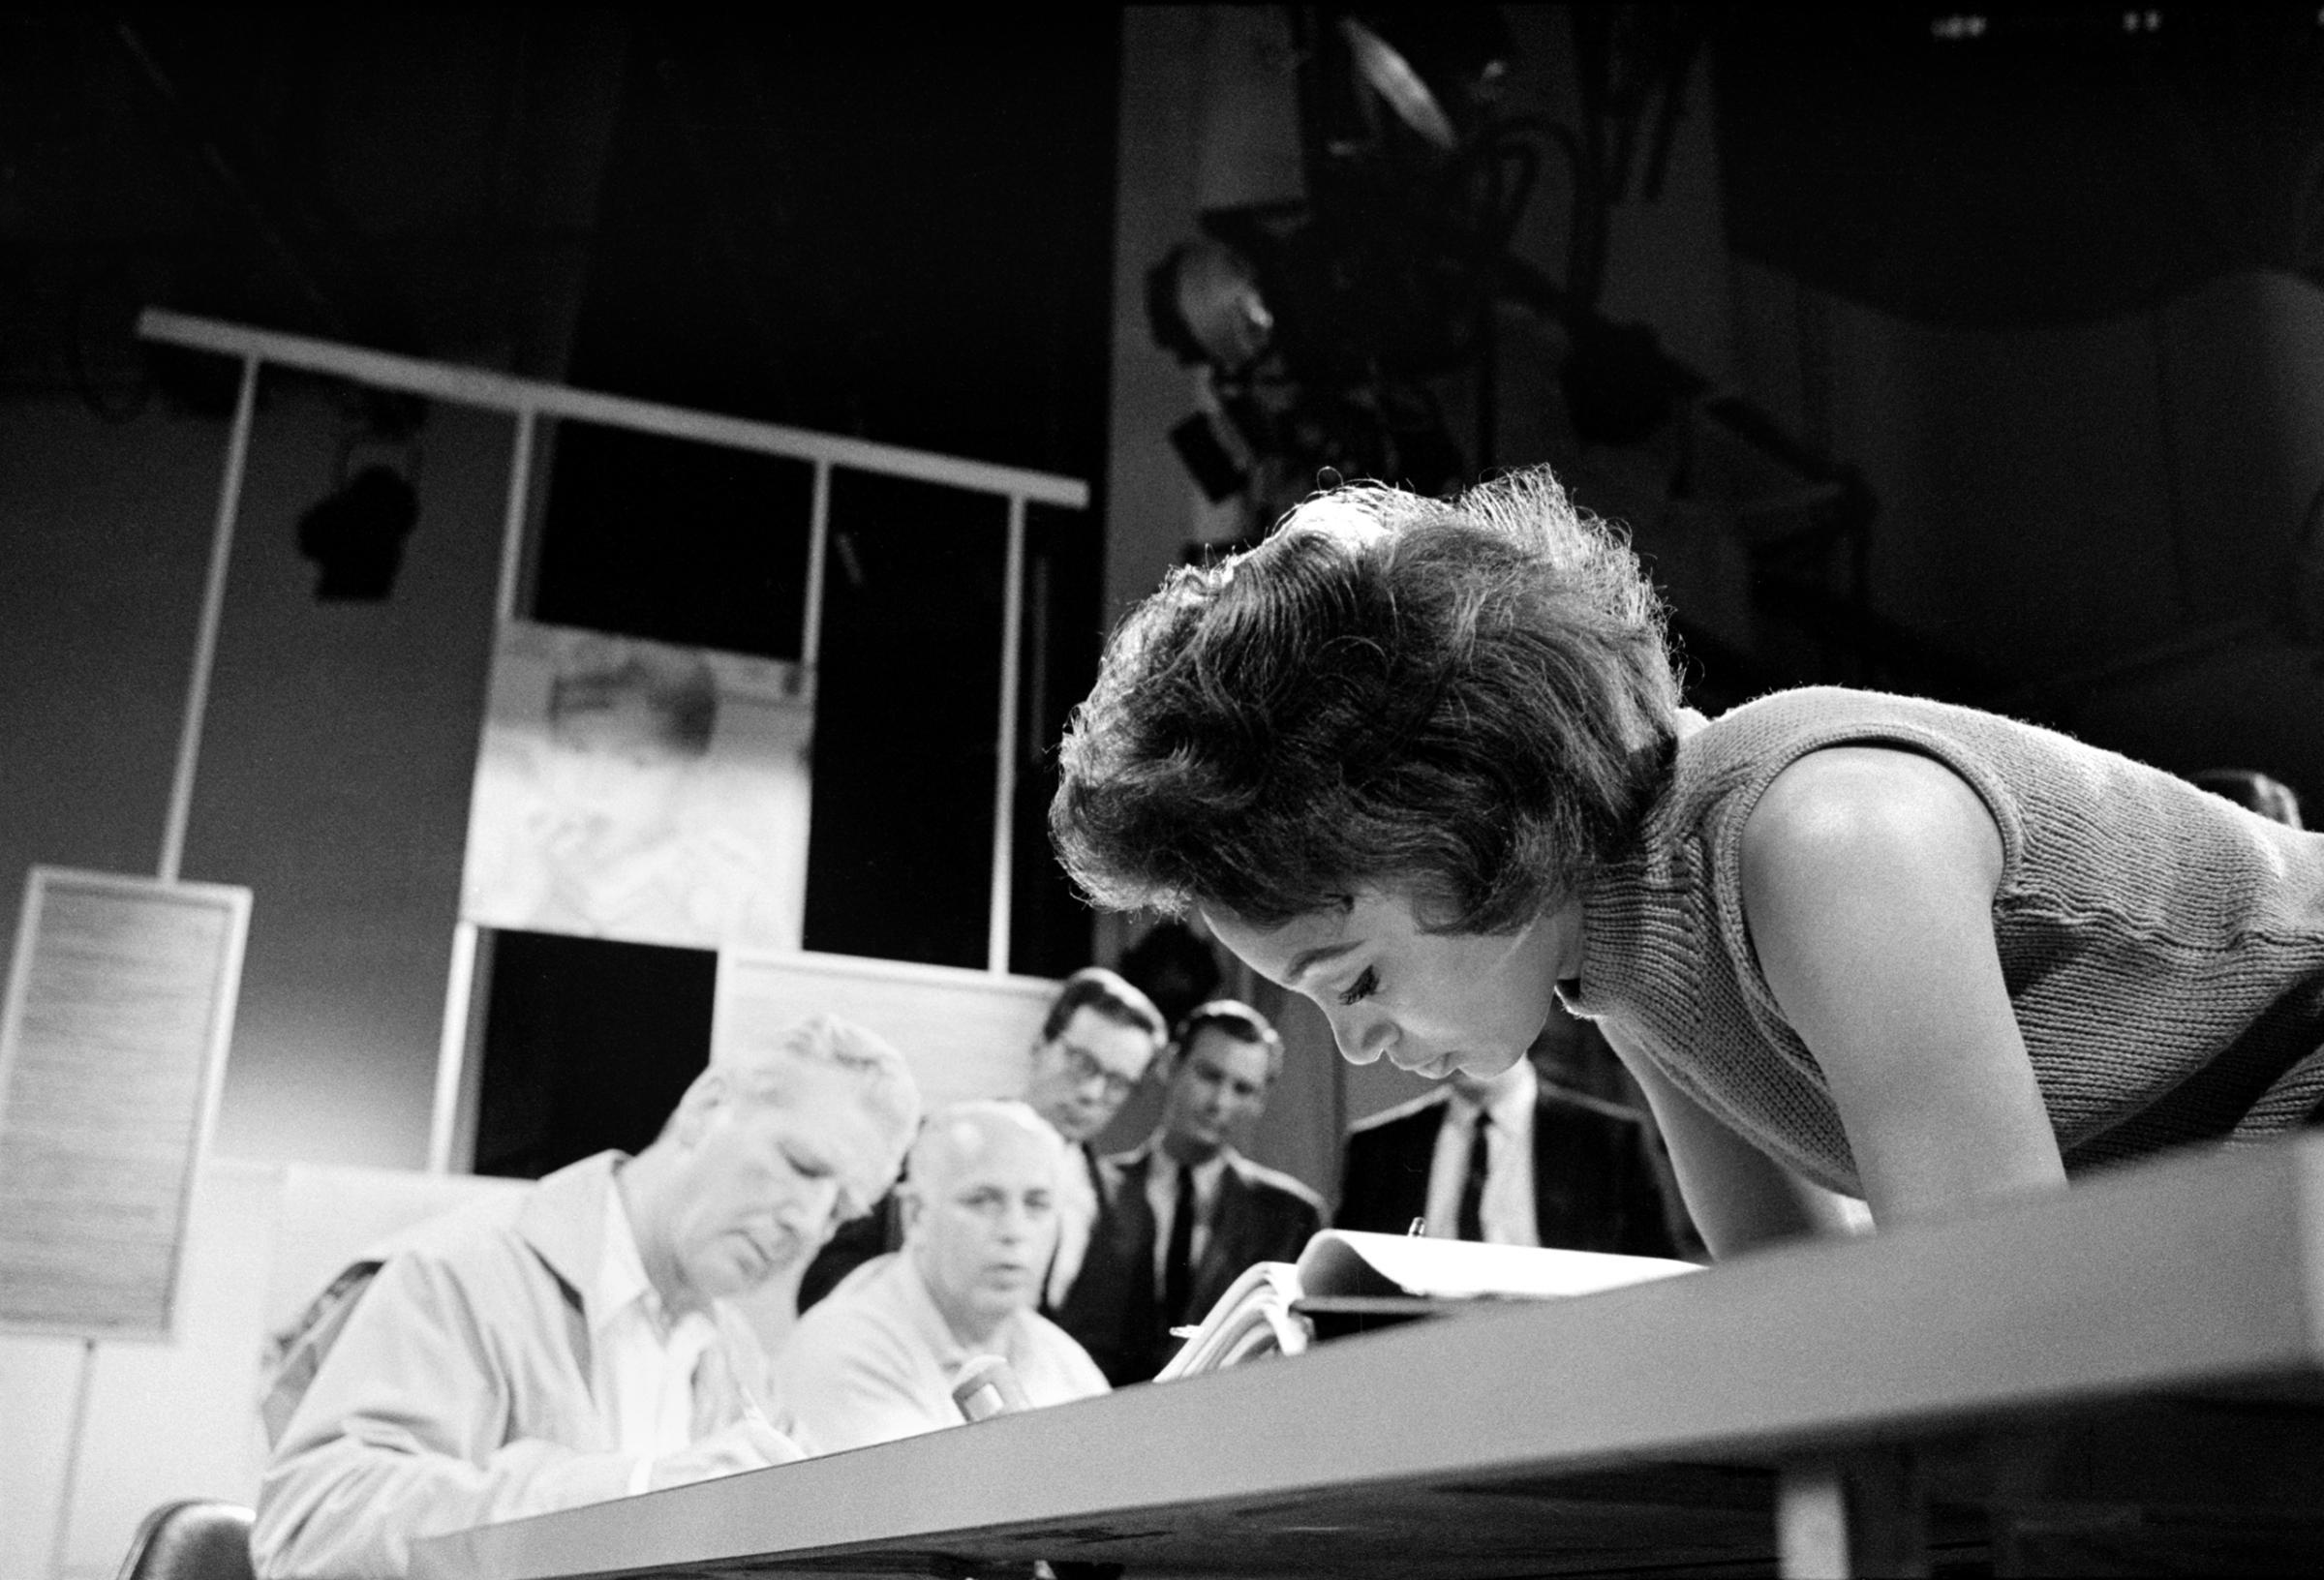 Joan Elizabeth Murray at work on the television show Candid Camera.